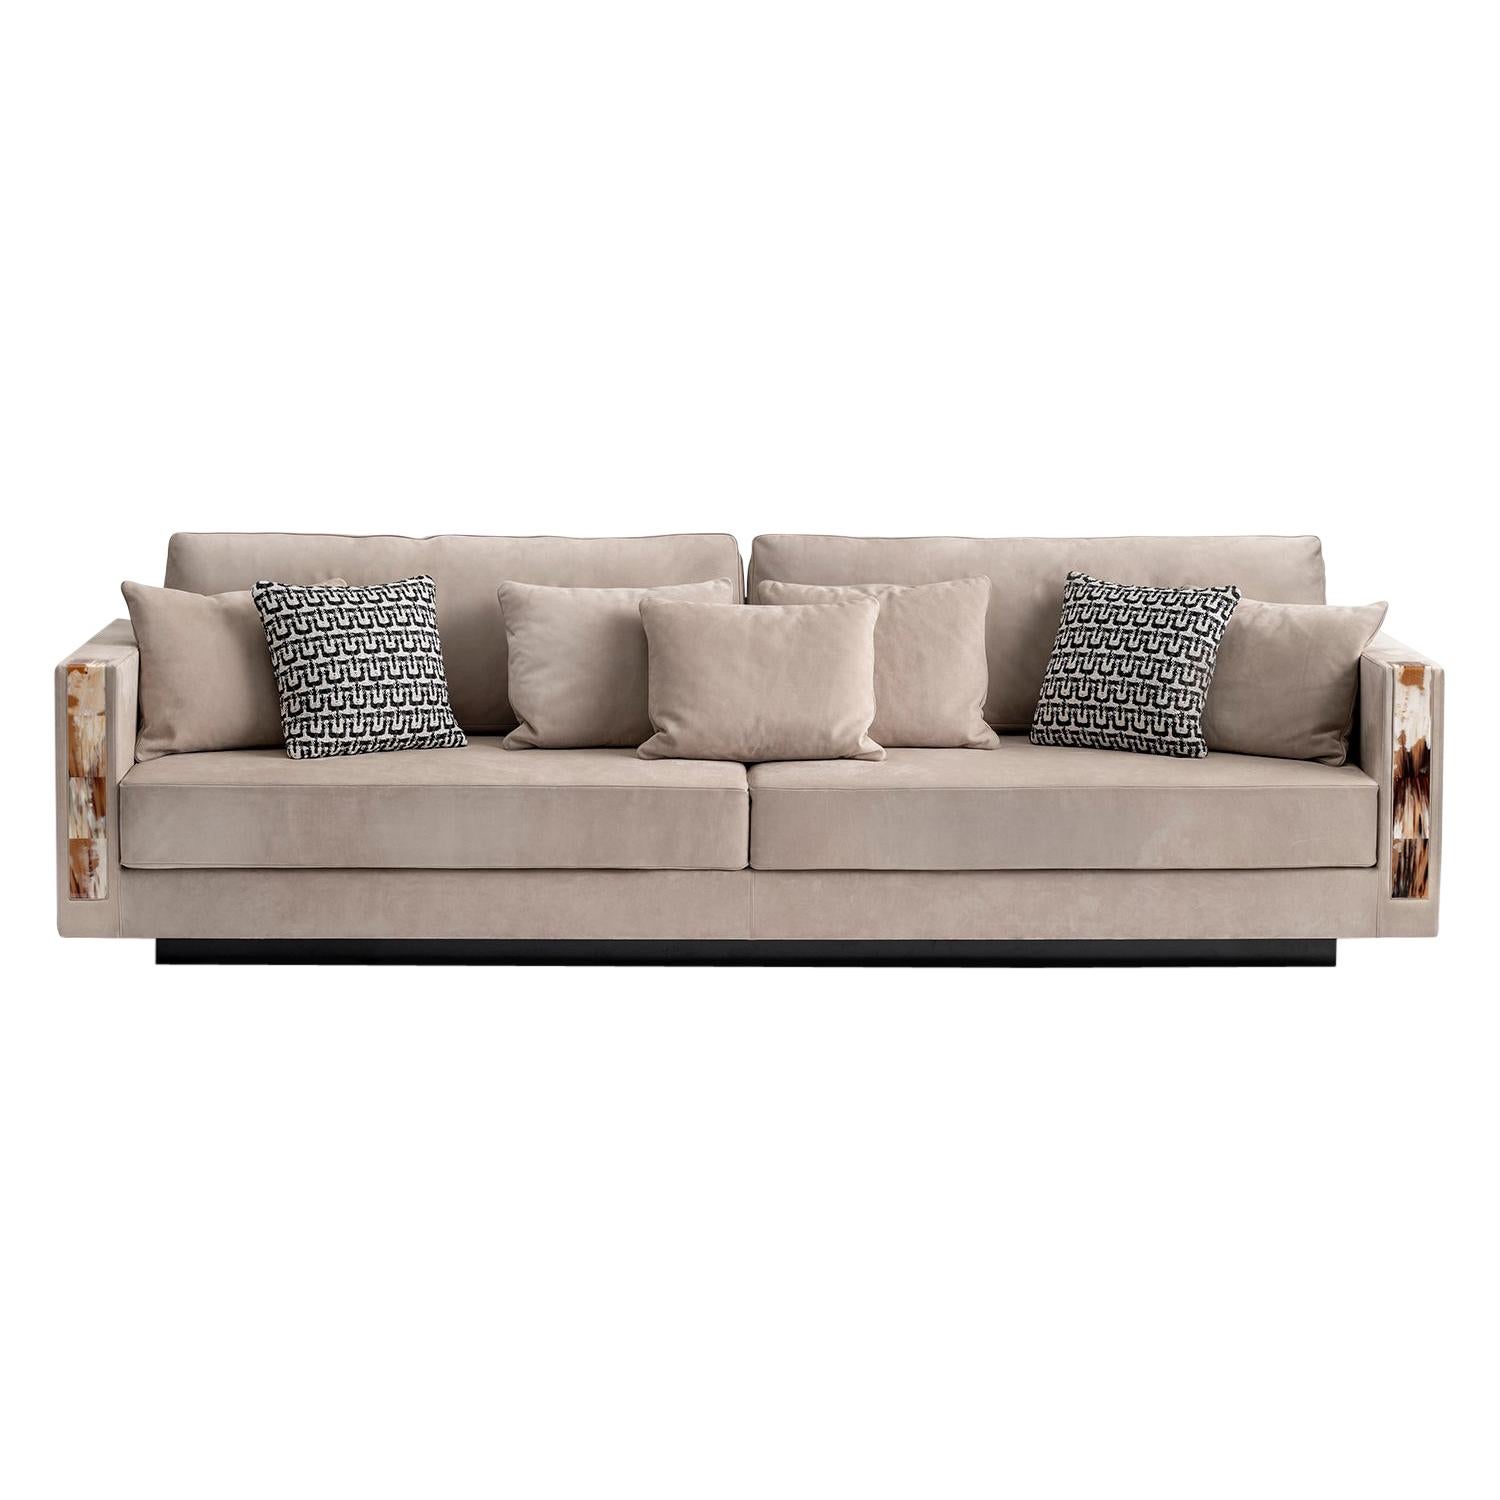 Zeus Sofa in Nabuk Leather with Armrests in Corno Italiano, Mod. 6085L